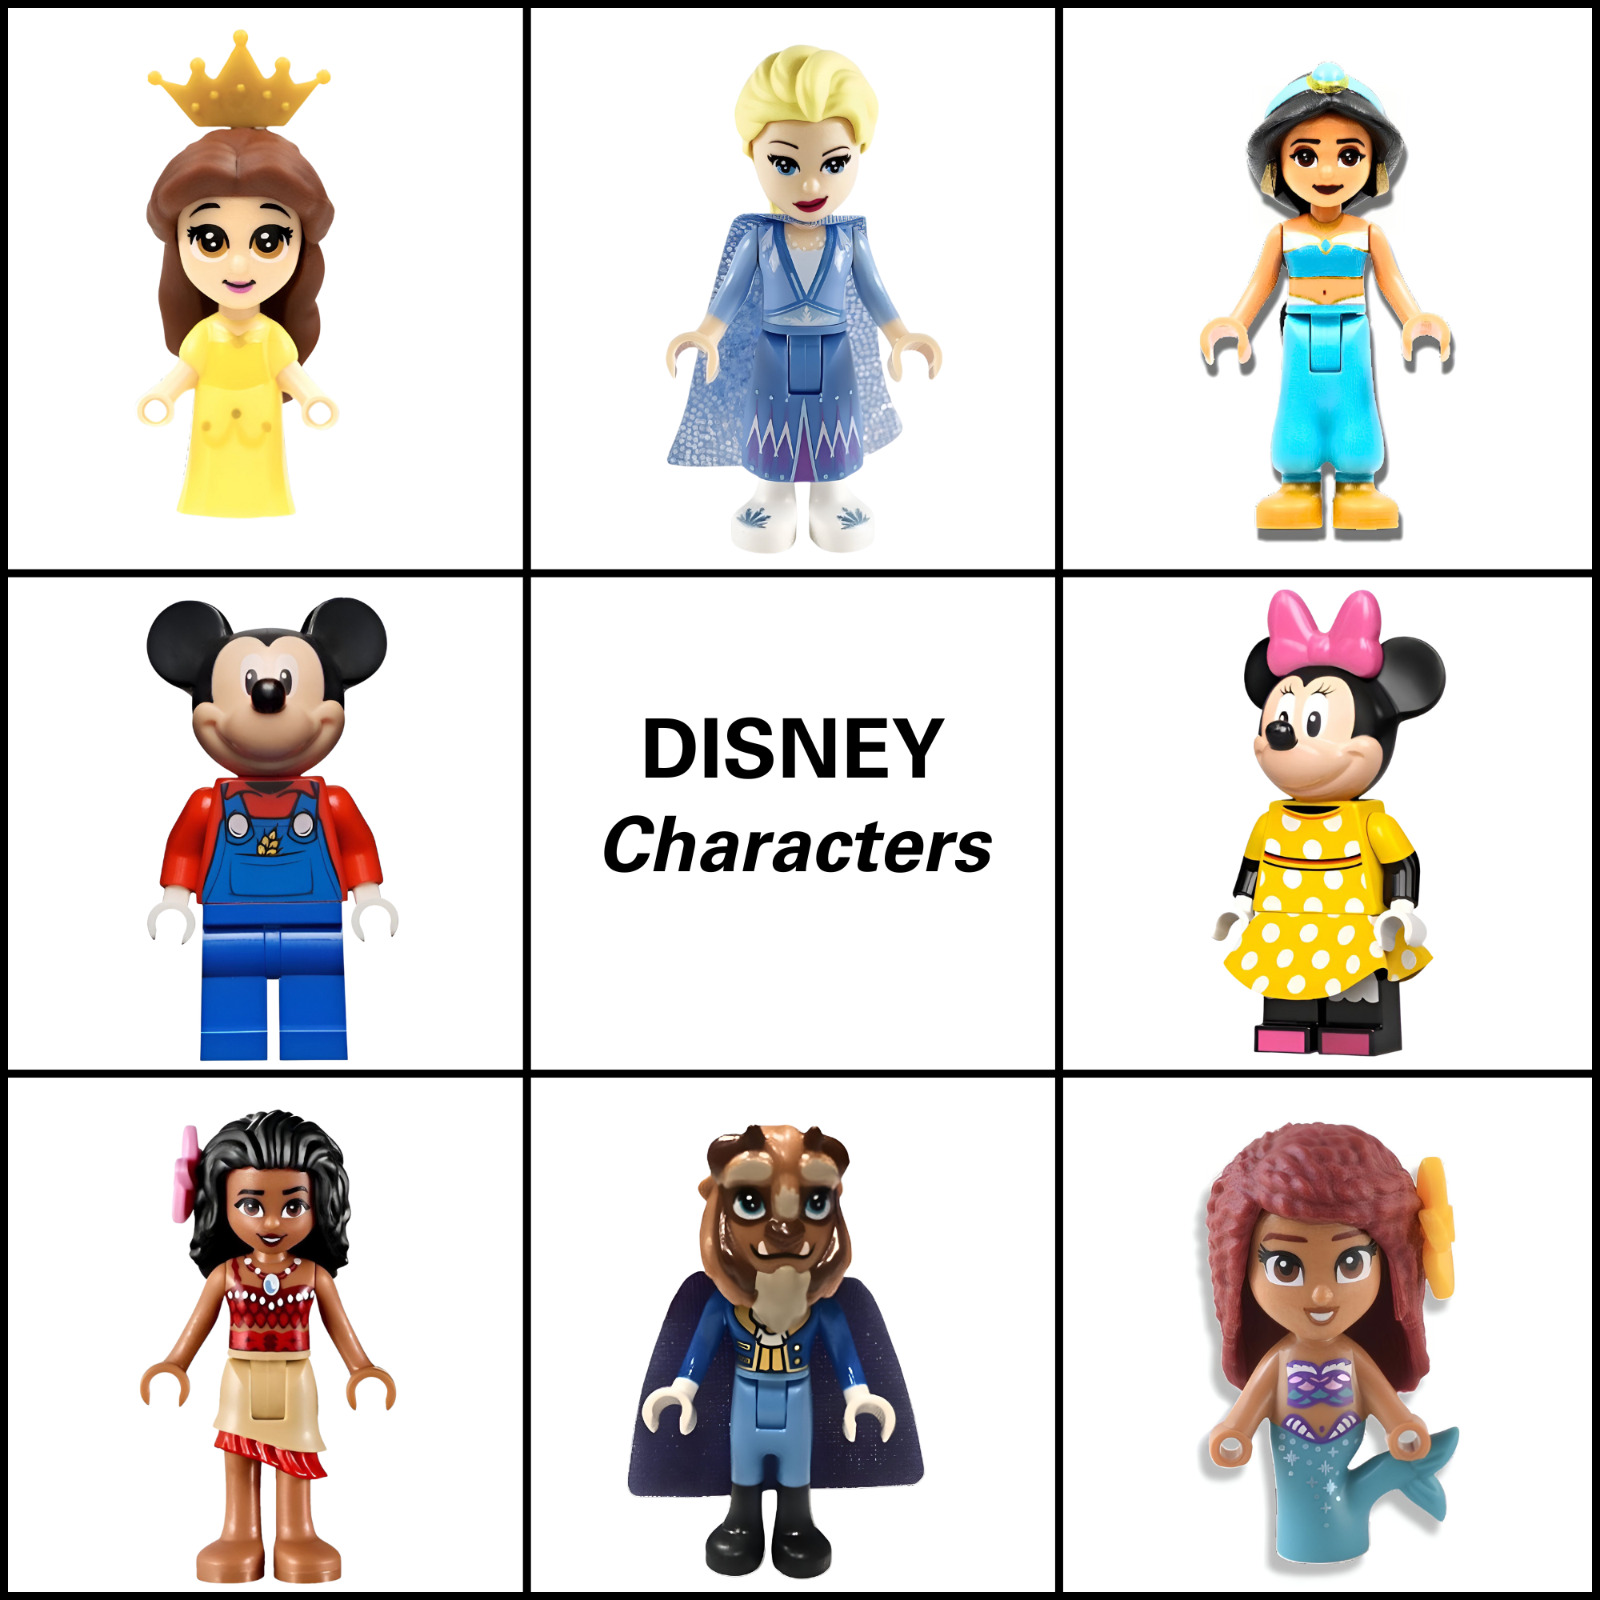 NEW & Authentic Disney LEGO Minifigures - Elsa, Mickey Mouse, Moana and More!